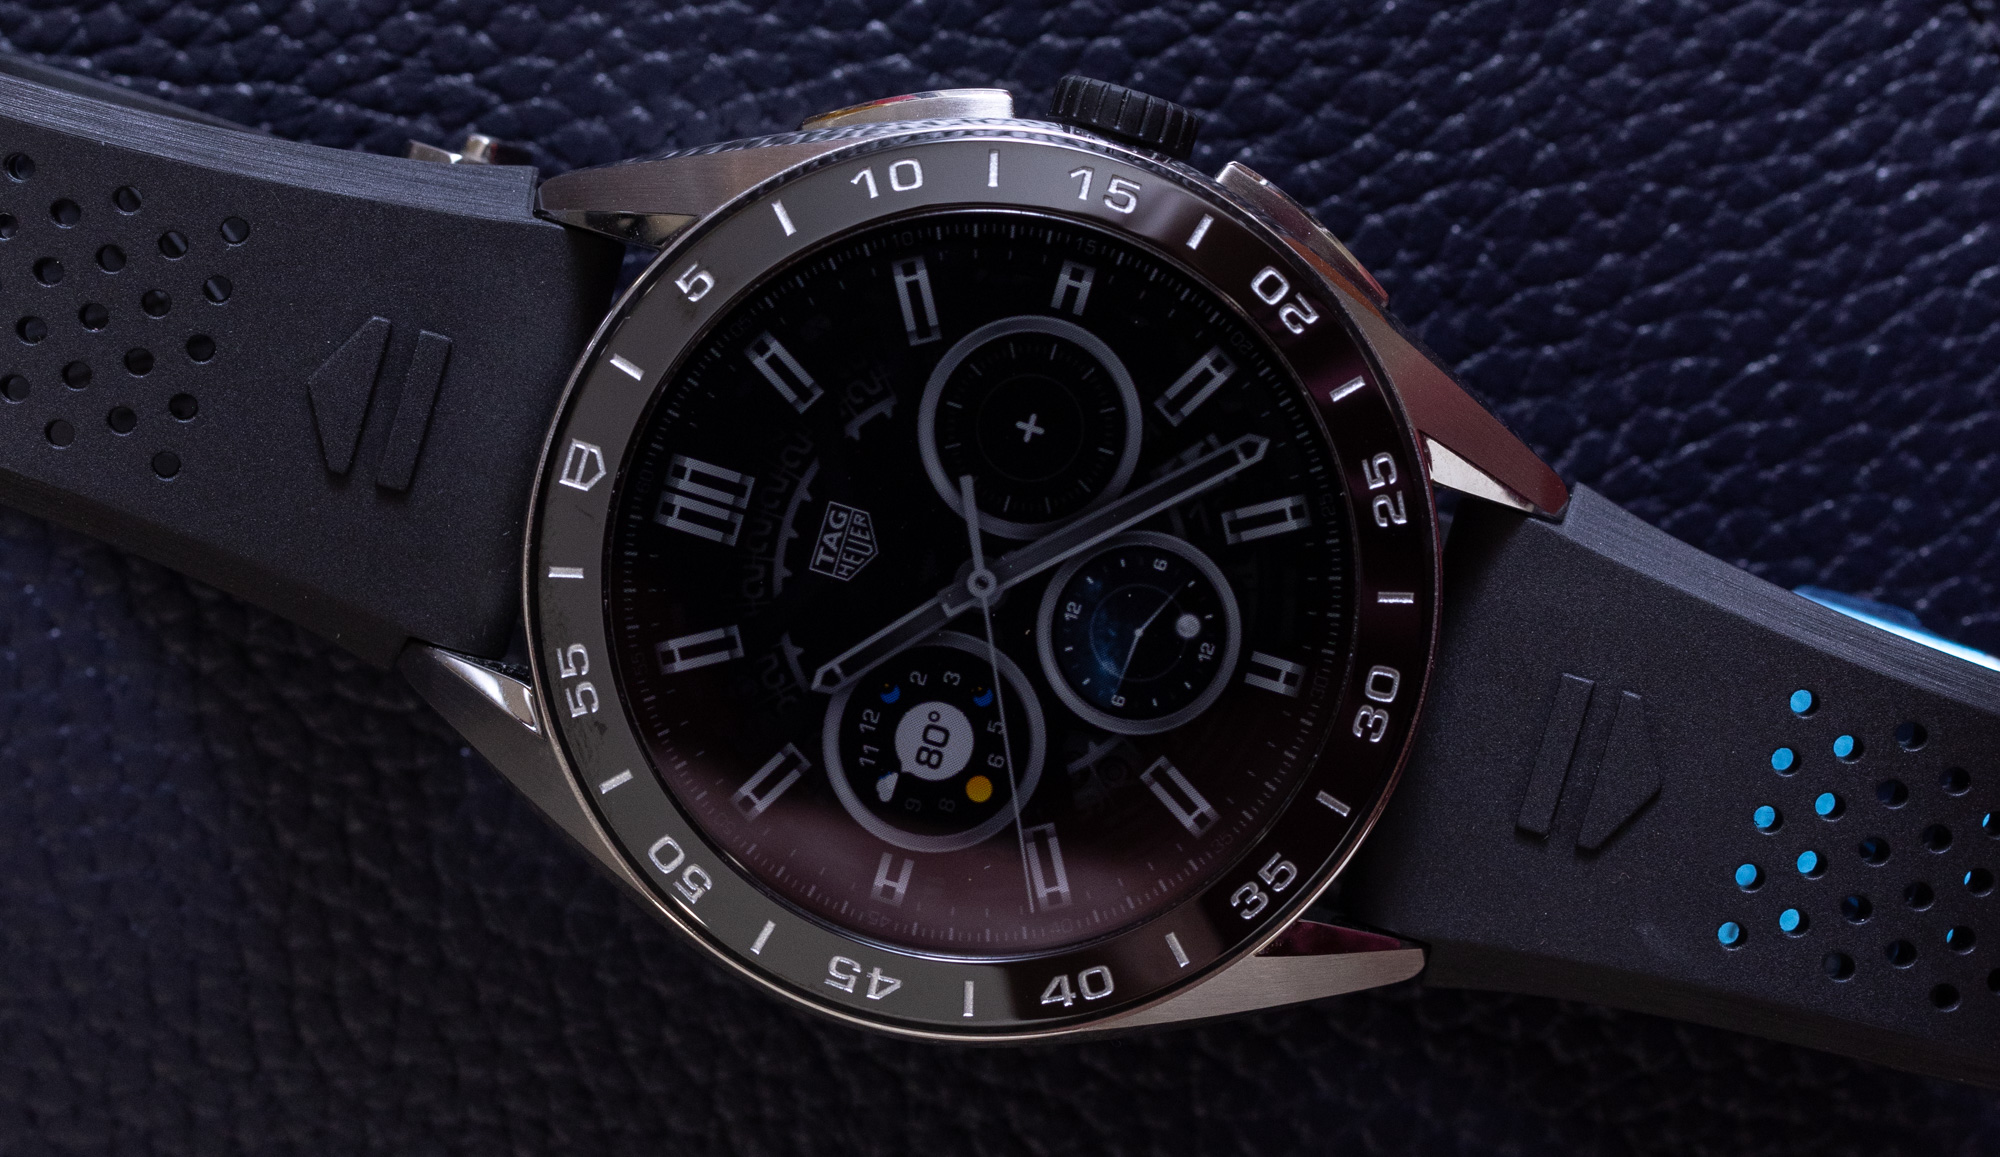  TAG HEUER CONNECTED Steel Case - Black Rubber Band